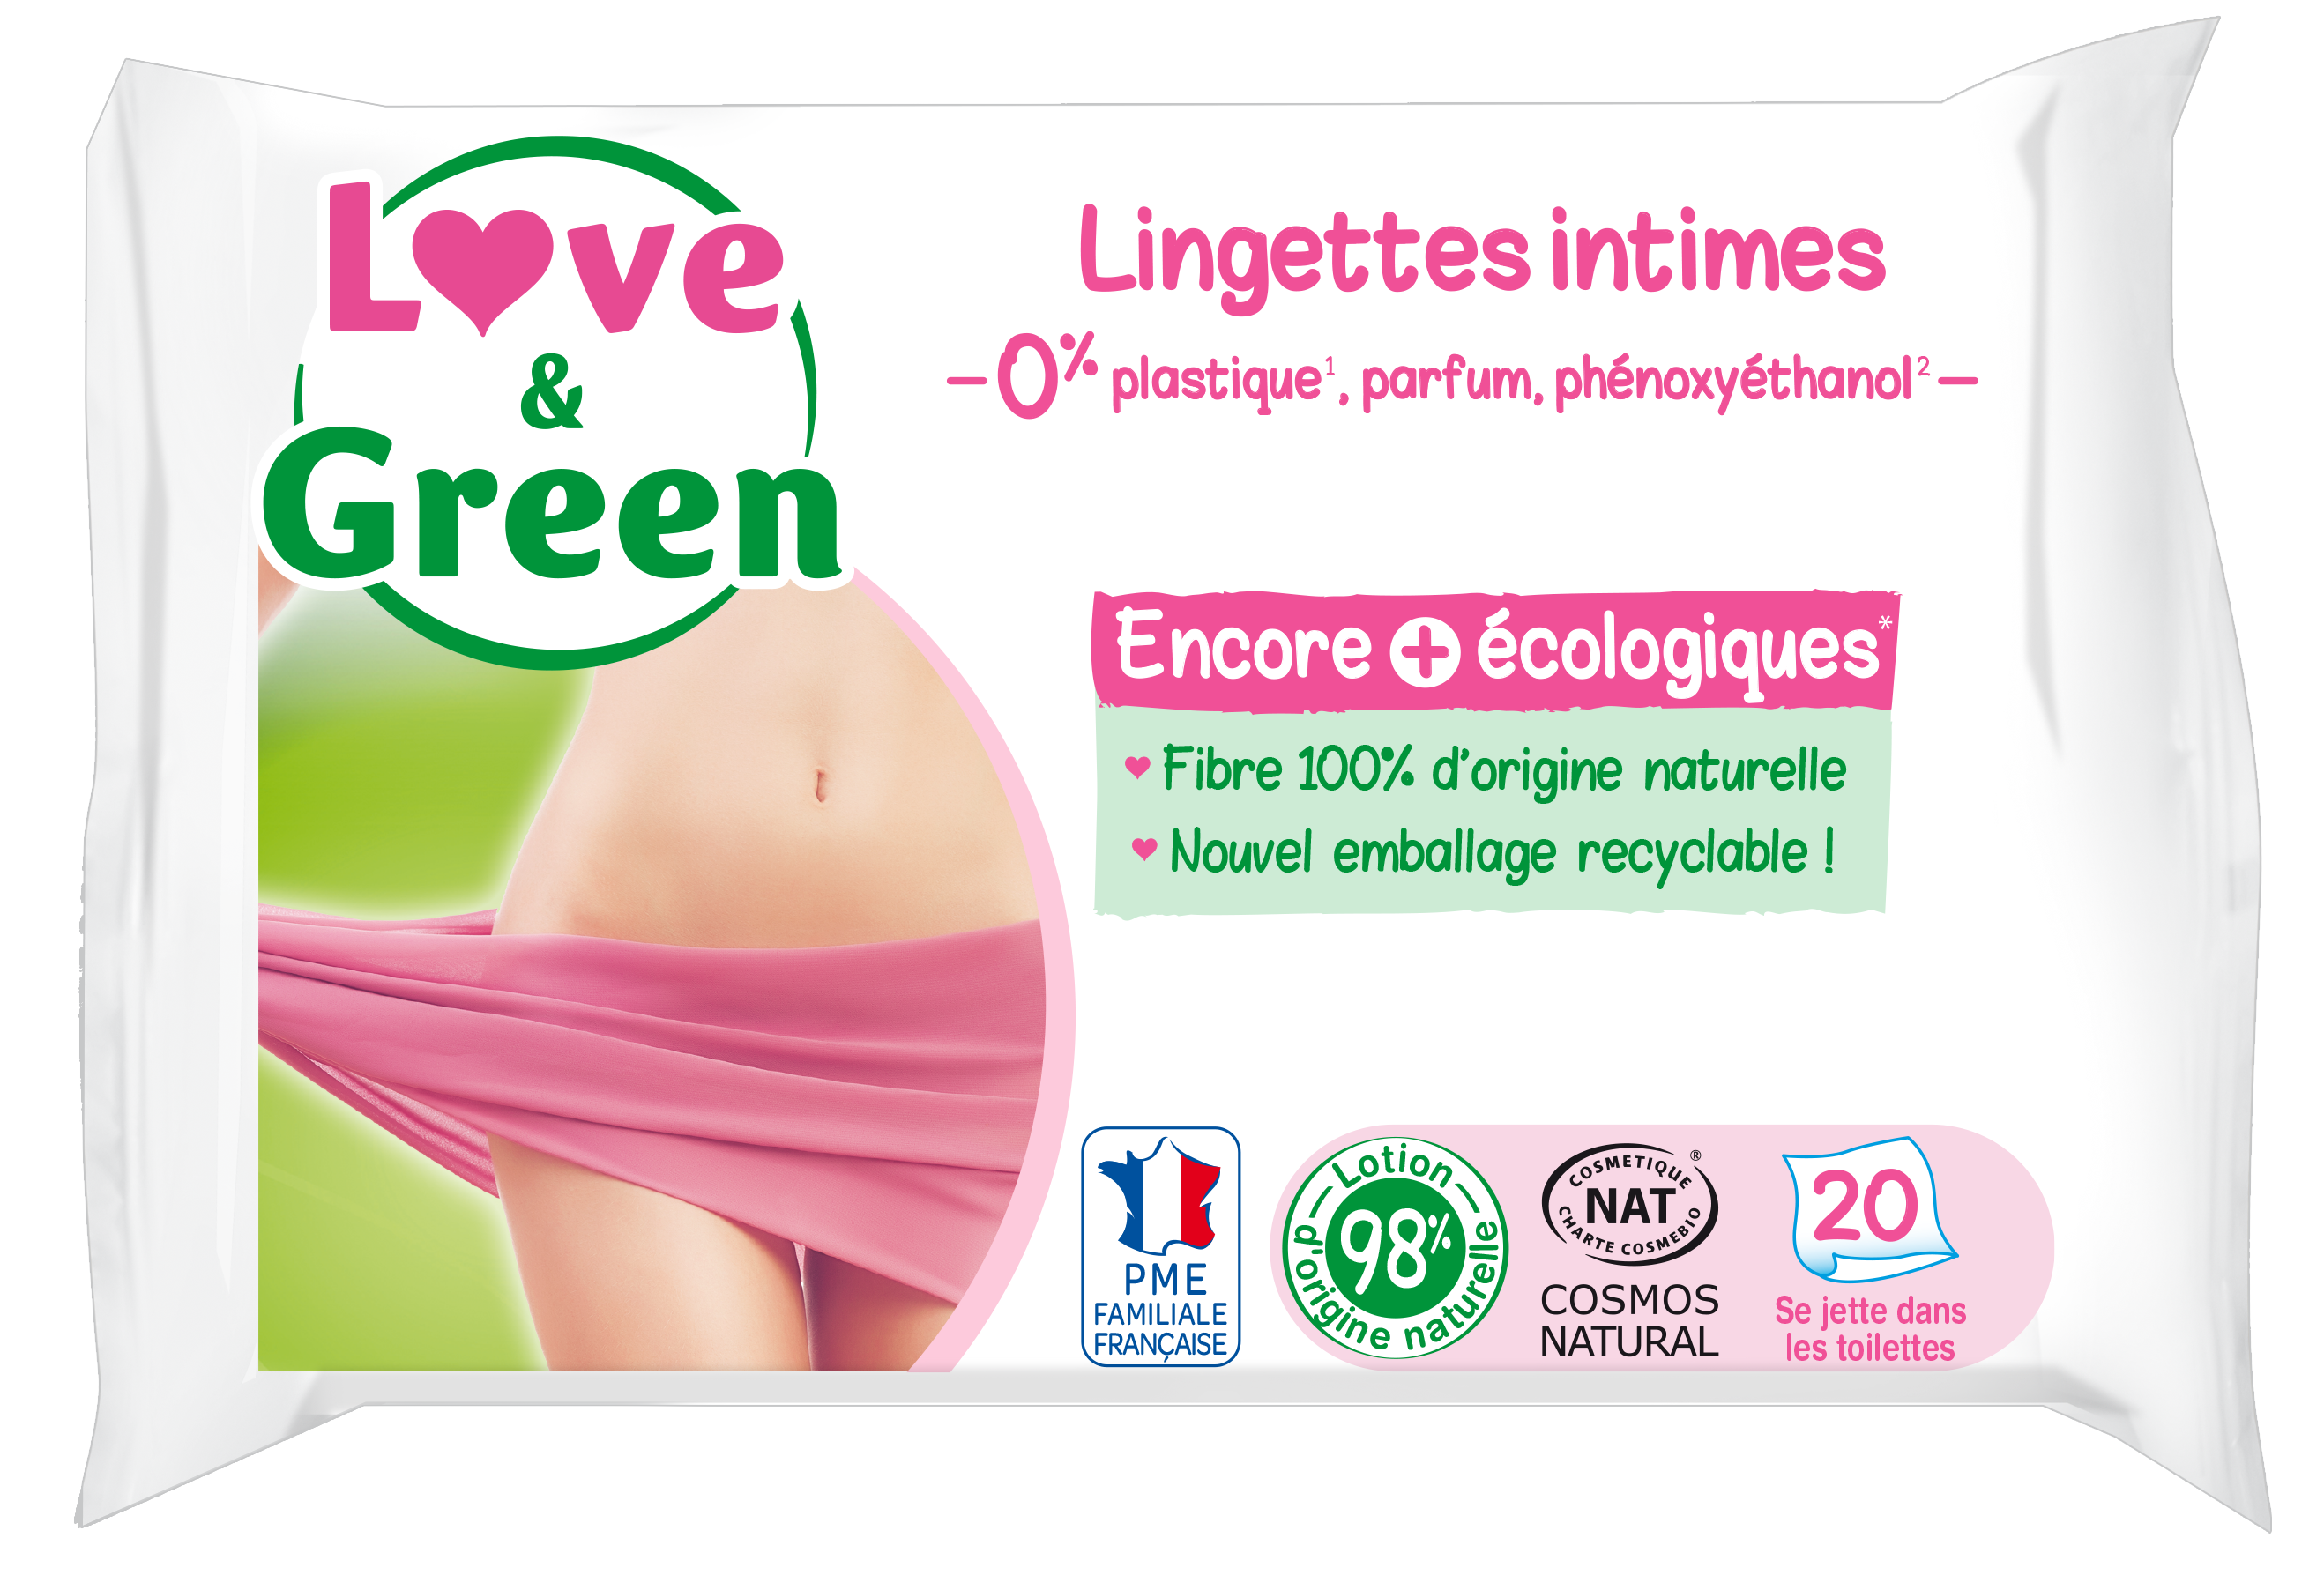 https://www.dentimed.ch/wp-content/uploads/2022/01/HF6009_Love_and_Green___Lingettes_intimes_-_aloe_vera_-_protections1-1.png